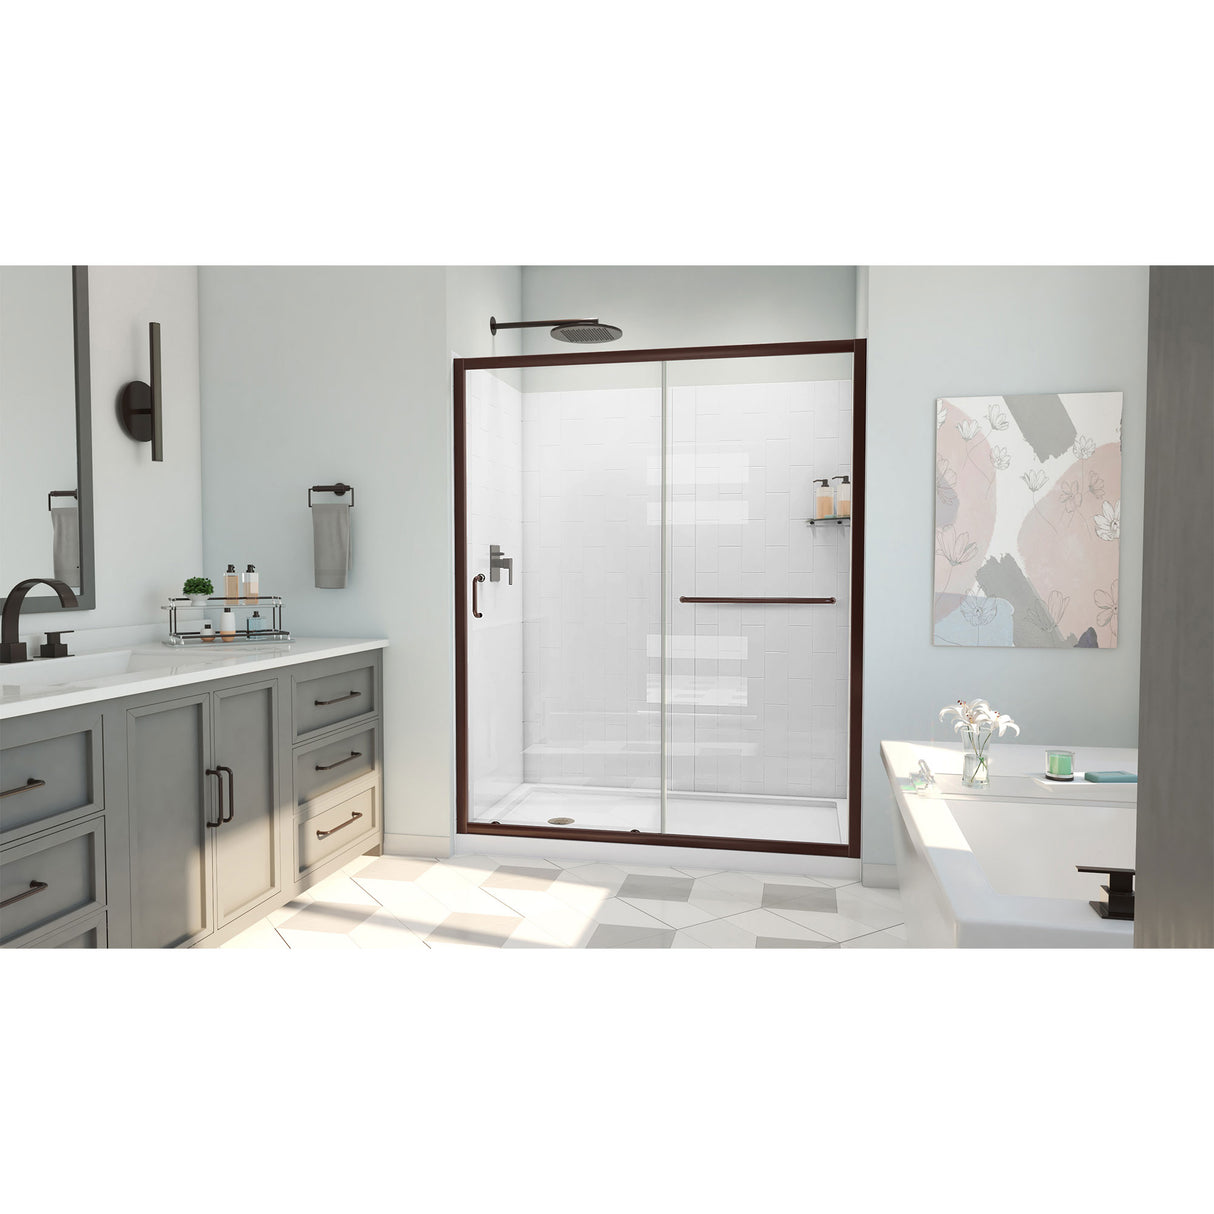 DreamLine Infinity-Z 34 in. D x 60 in. W x 78 3/4 in. H Sliding Shower Door, Base, and White Wall Kit in Oil Rubbed Bronze and Clear Glass